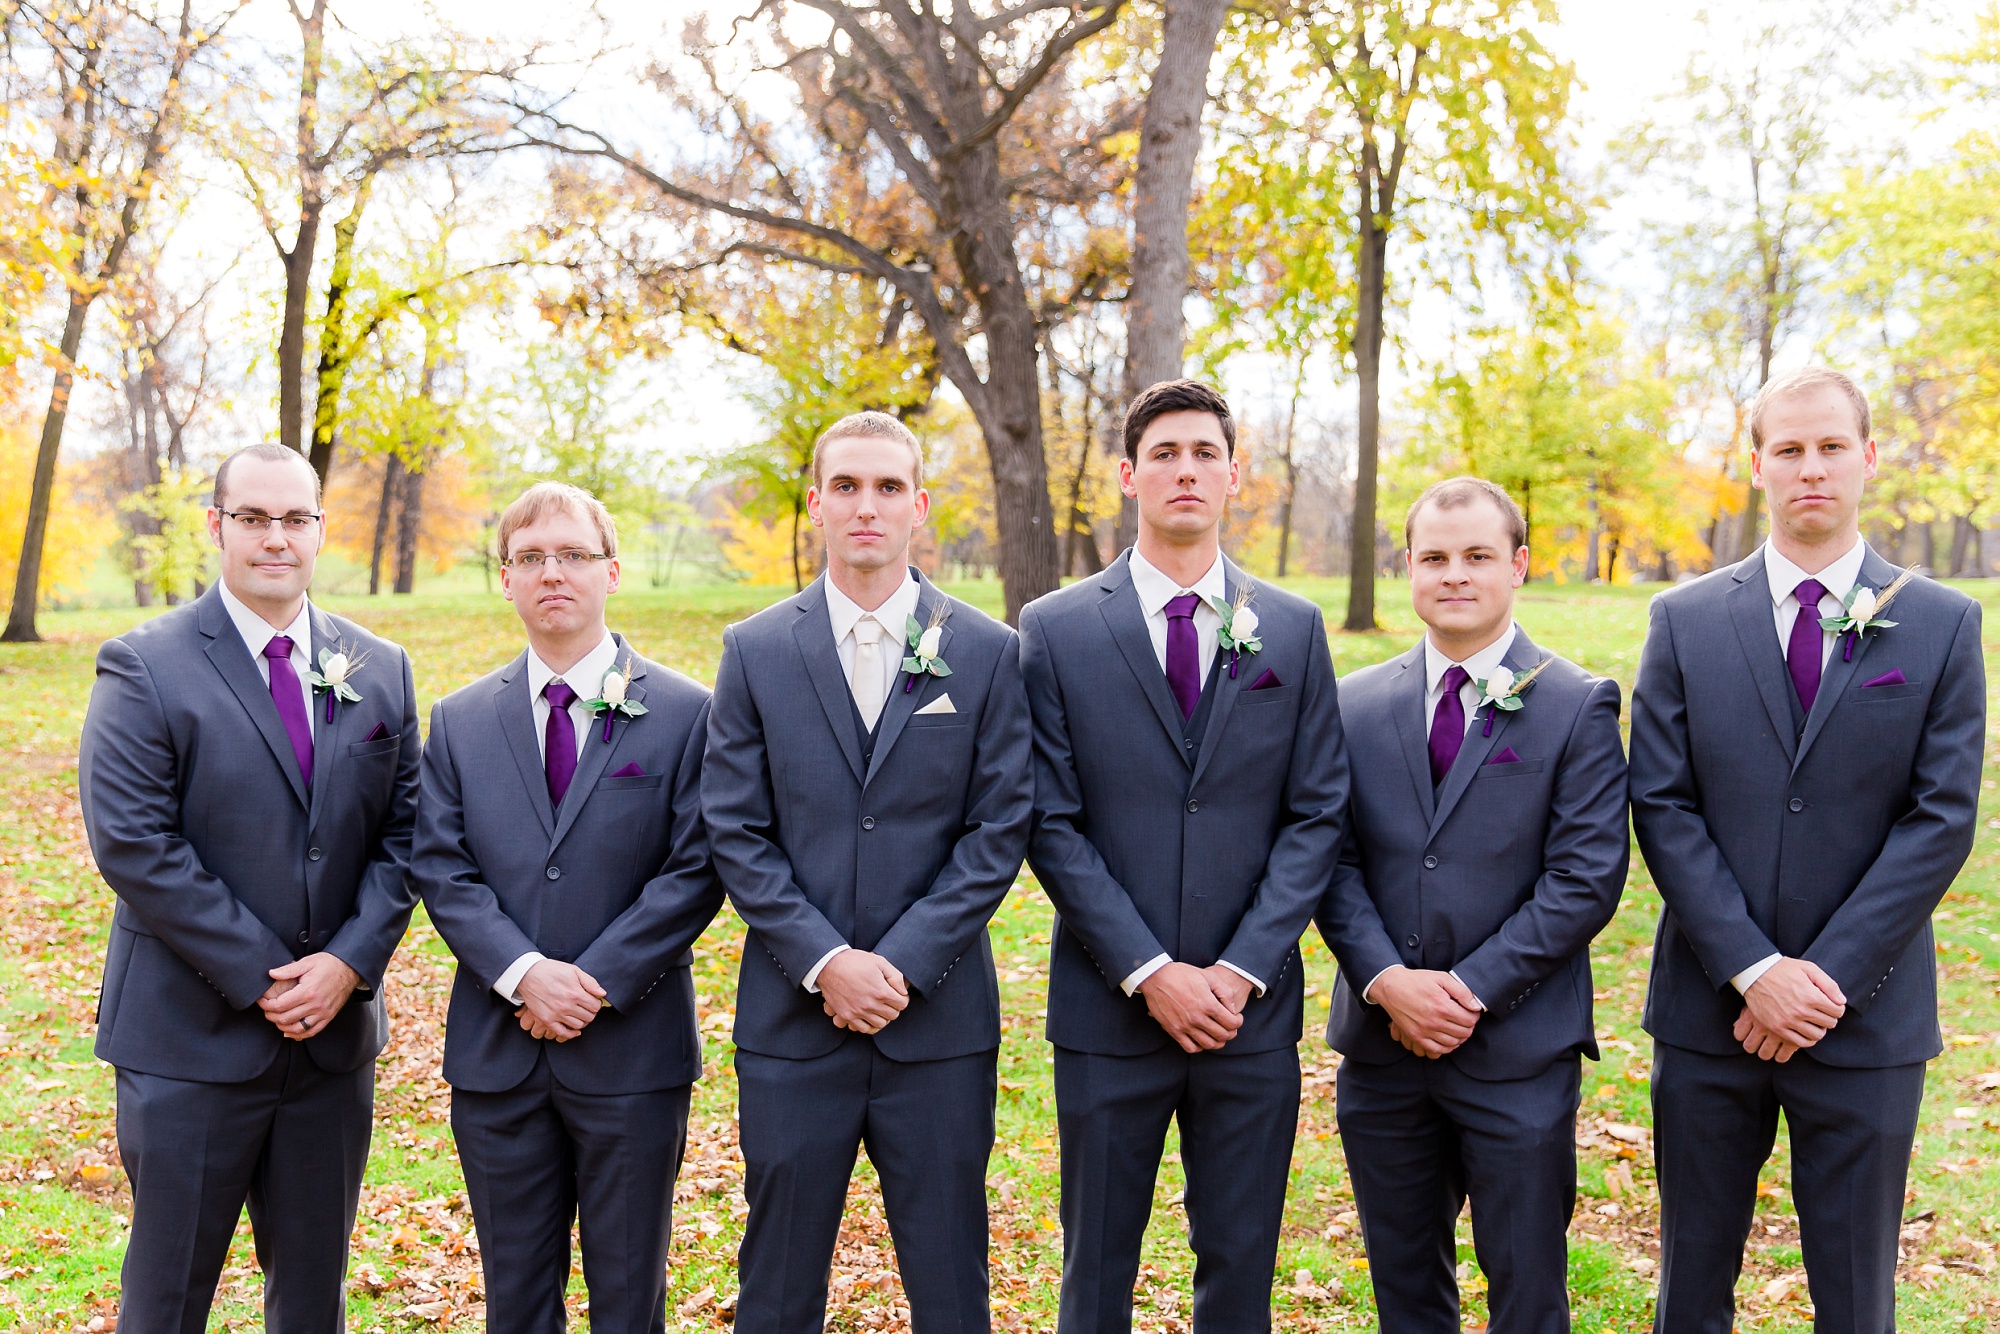 Classy, Rustic Styled Fall Wedding at the First Congregational Church of Christ and the Cambria Hotel &amp; Suites in Fargo, ND | Portraits at Lindenwood Park | Dani &amp; Alex | Photography by Amber Langerud Photography